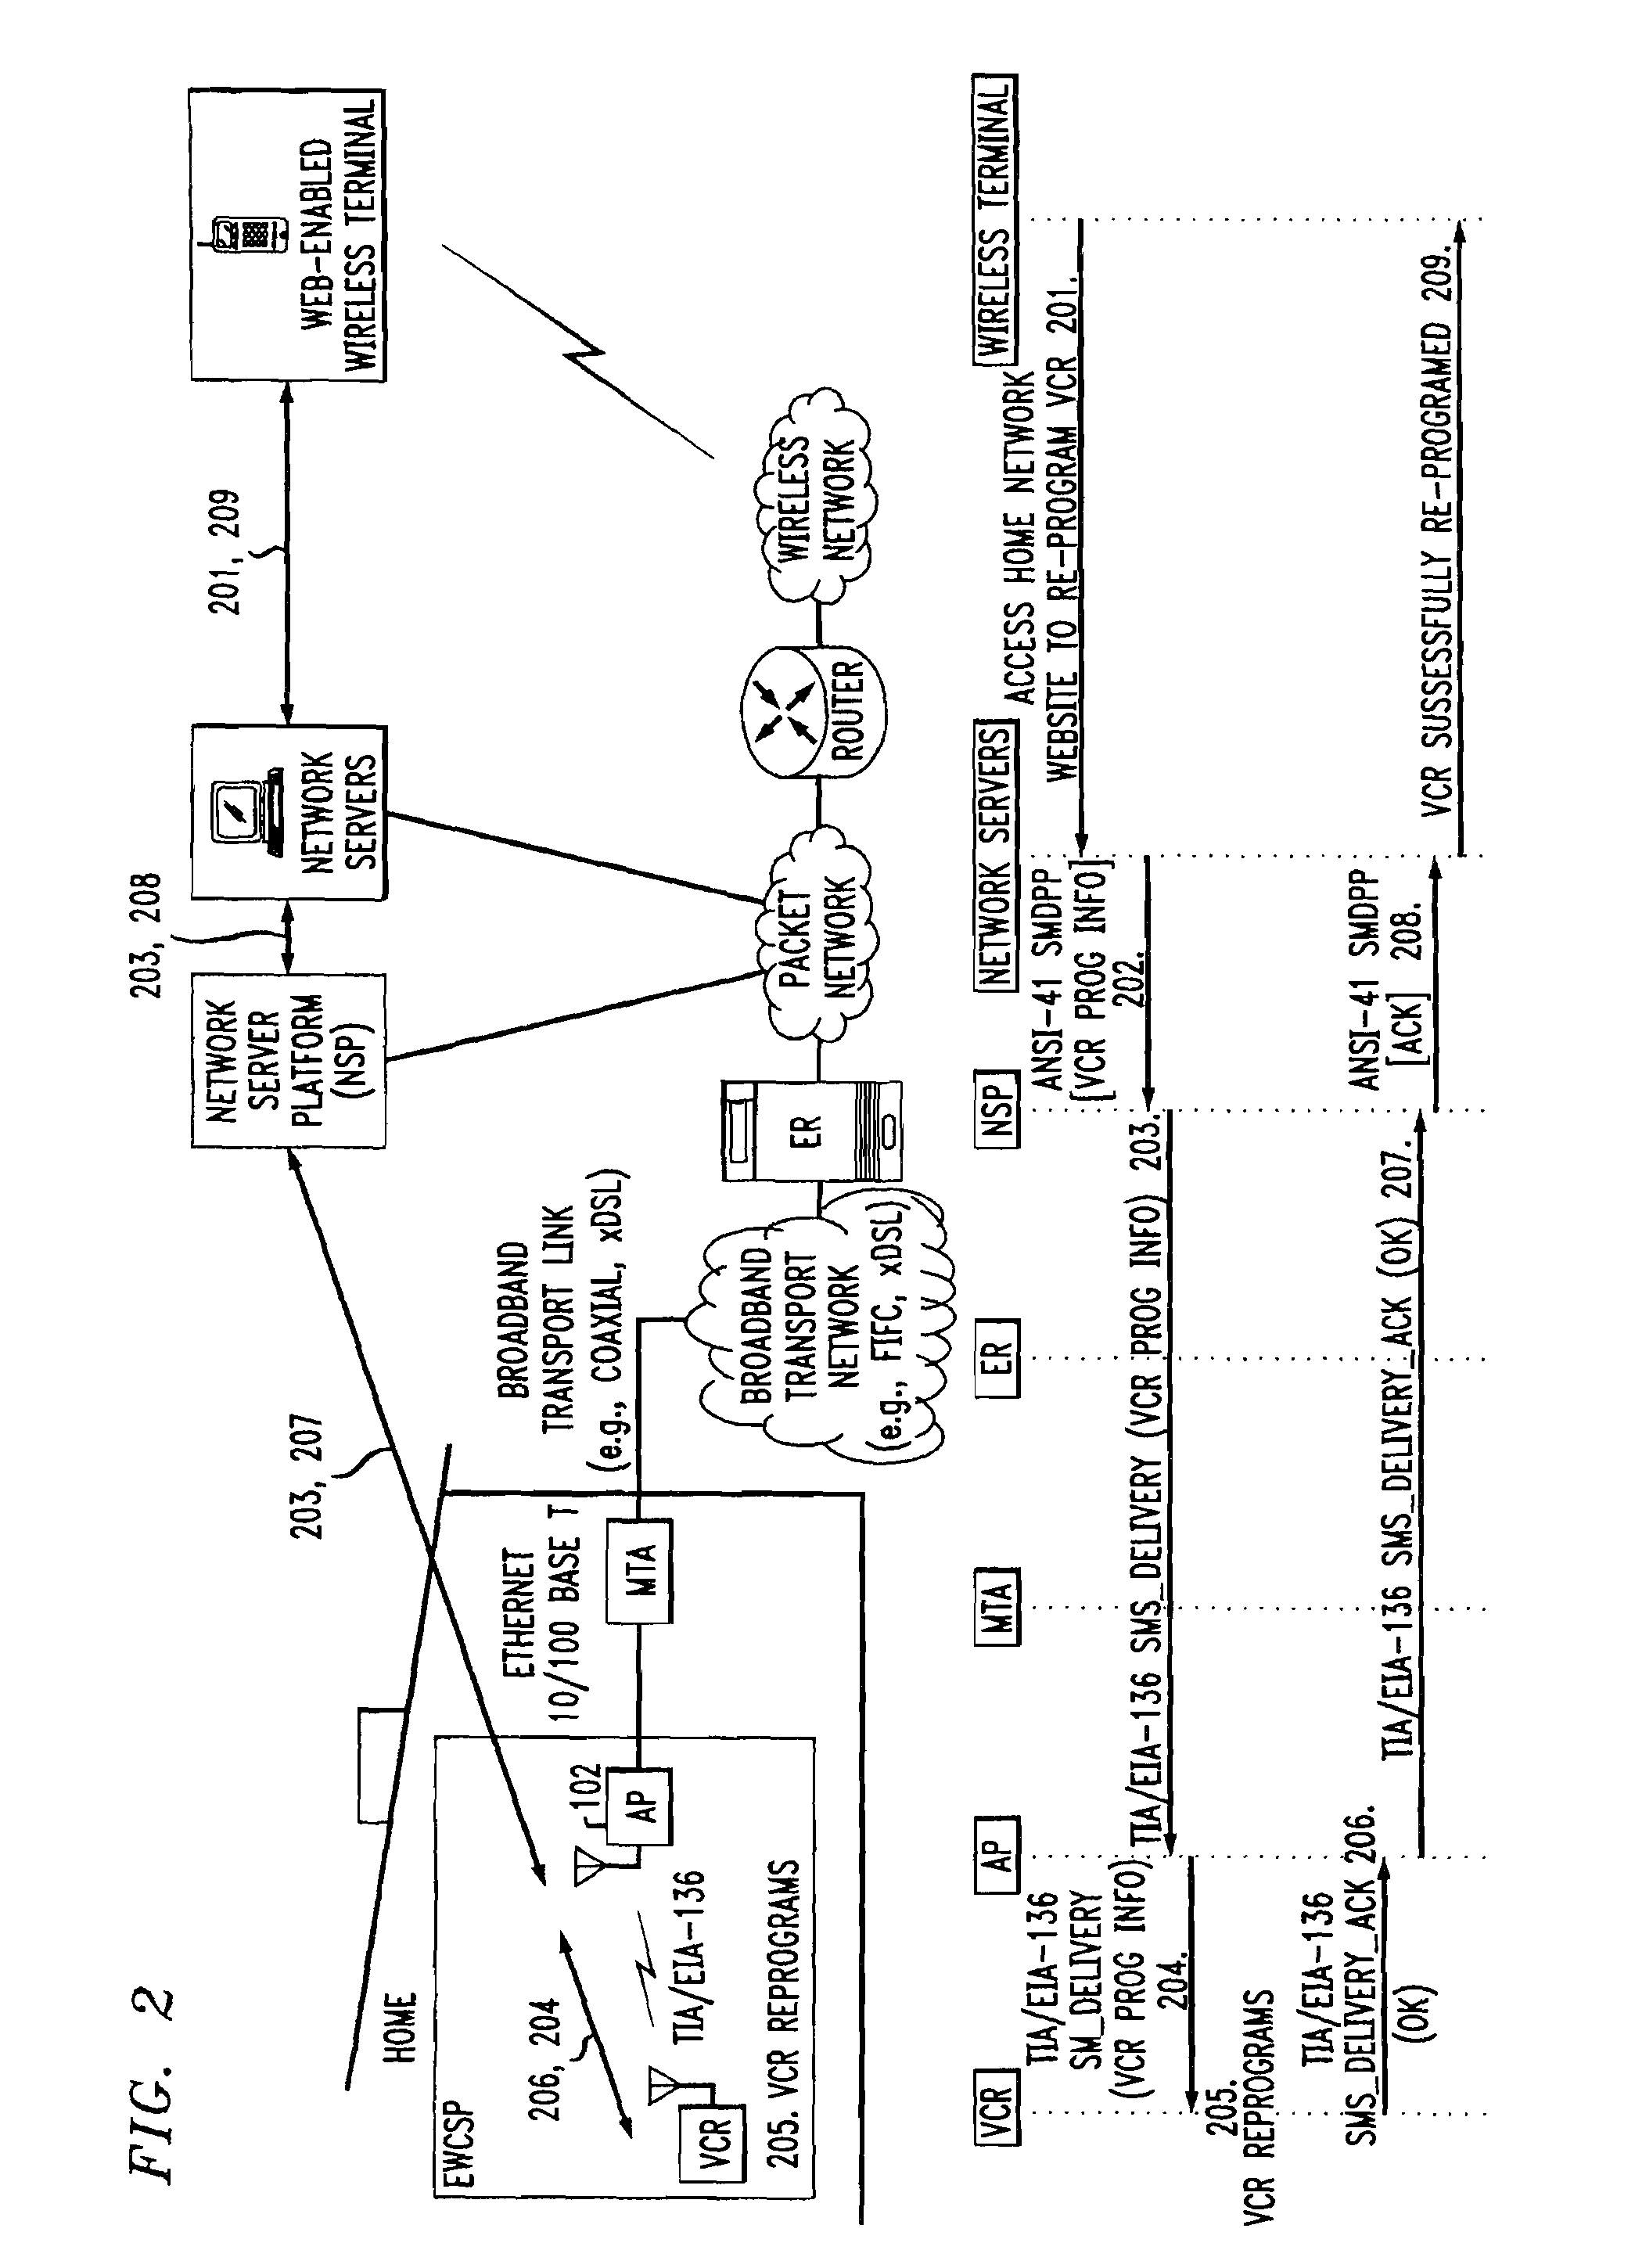 Computer readable medium with embedded instructions for providing communication services between a broadband network and an enterprise wireless communication platform within a residential or business environment